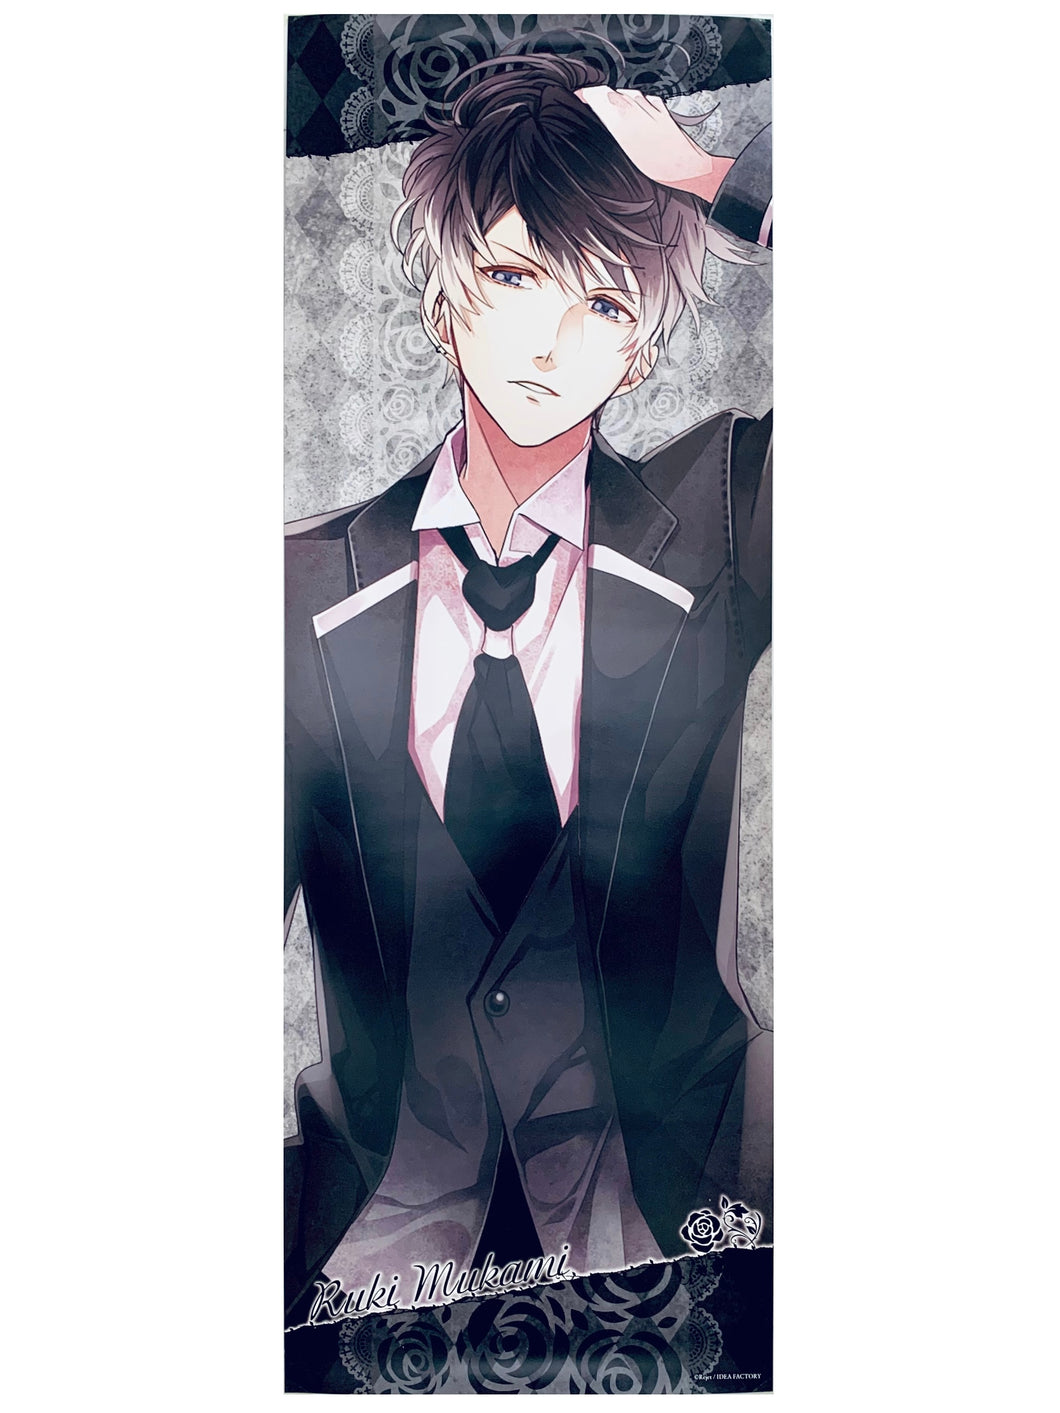 Diabolik Lovers Bloody Bouquet - Mukami Ruki - DiaLover 'BLOODY BOUQUET' Poster Collection